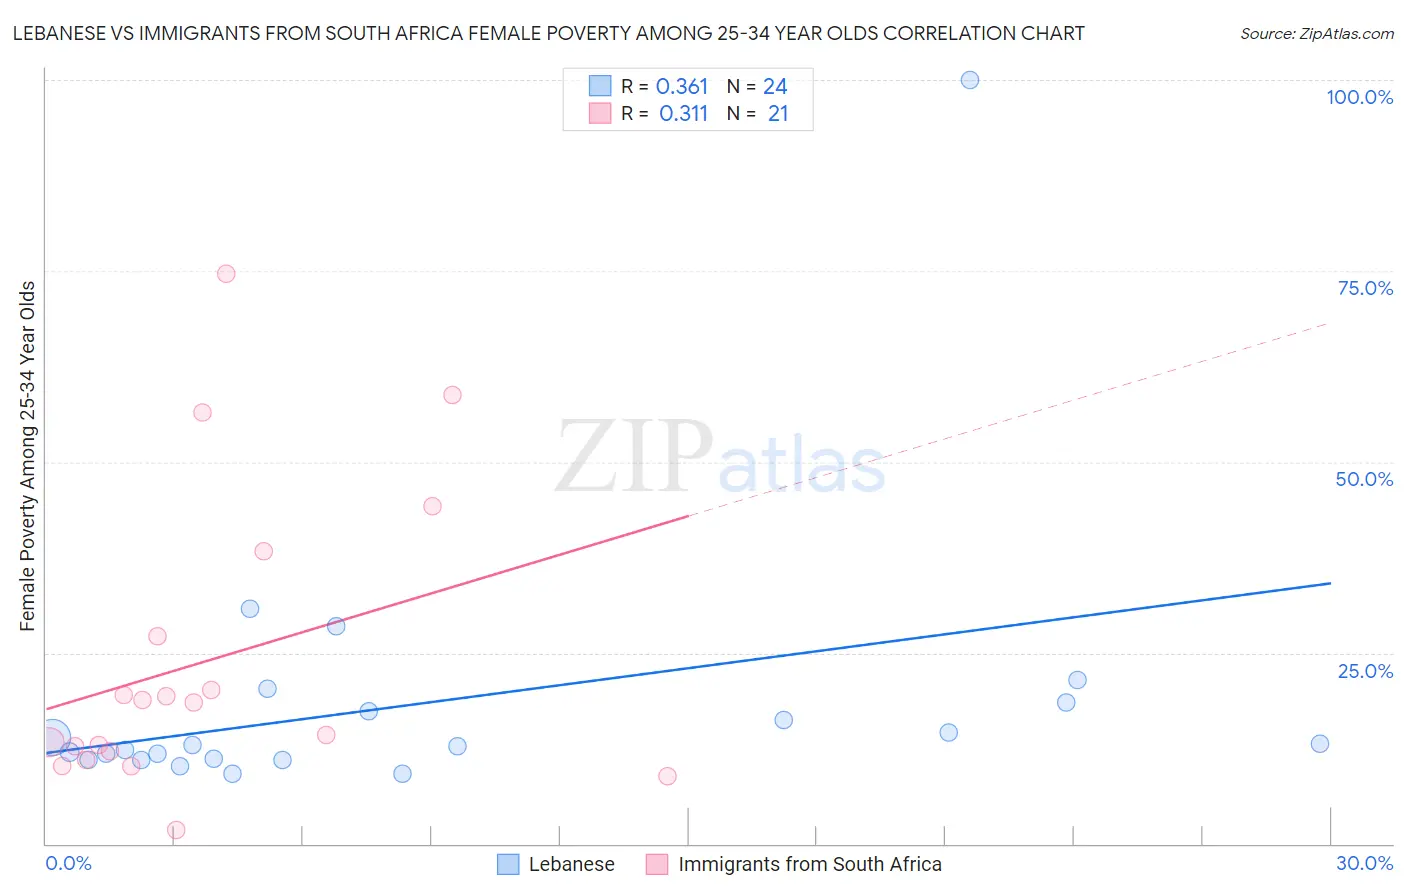 Lebanese vs Immigrants from South Africa Female Poverty Among 25-34 Year Olds